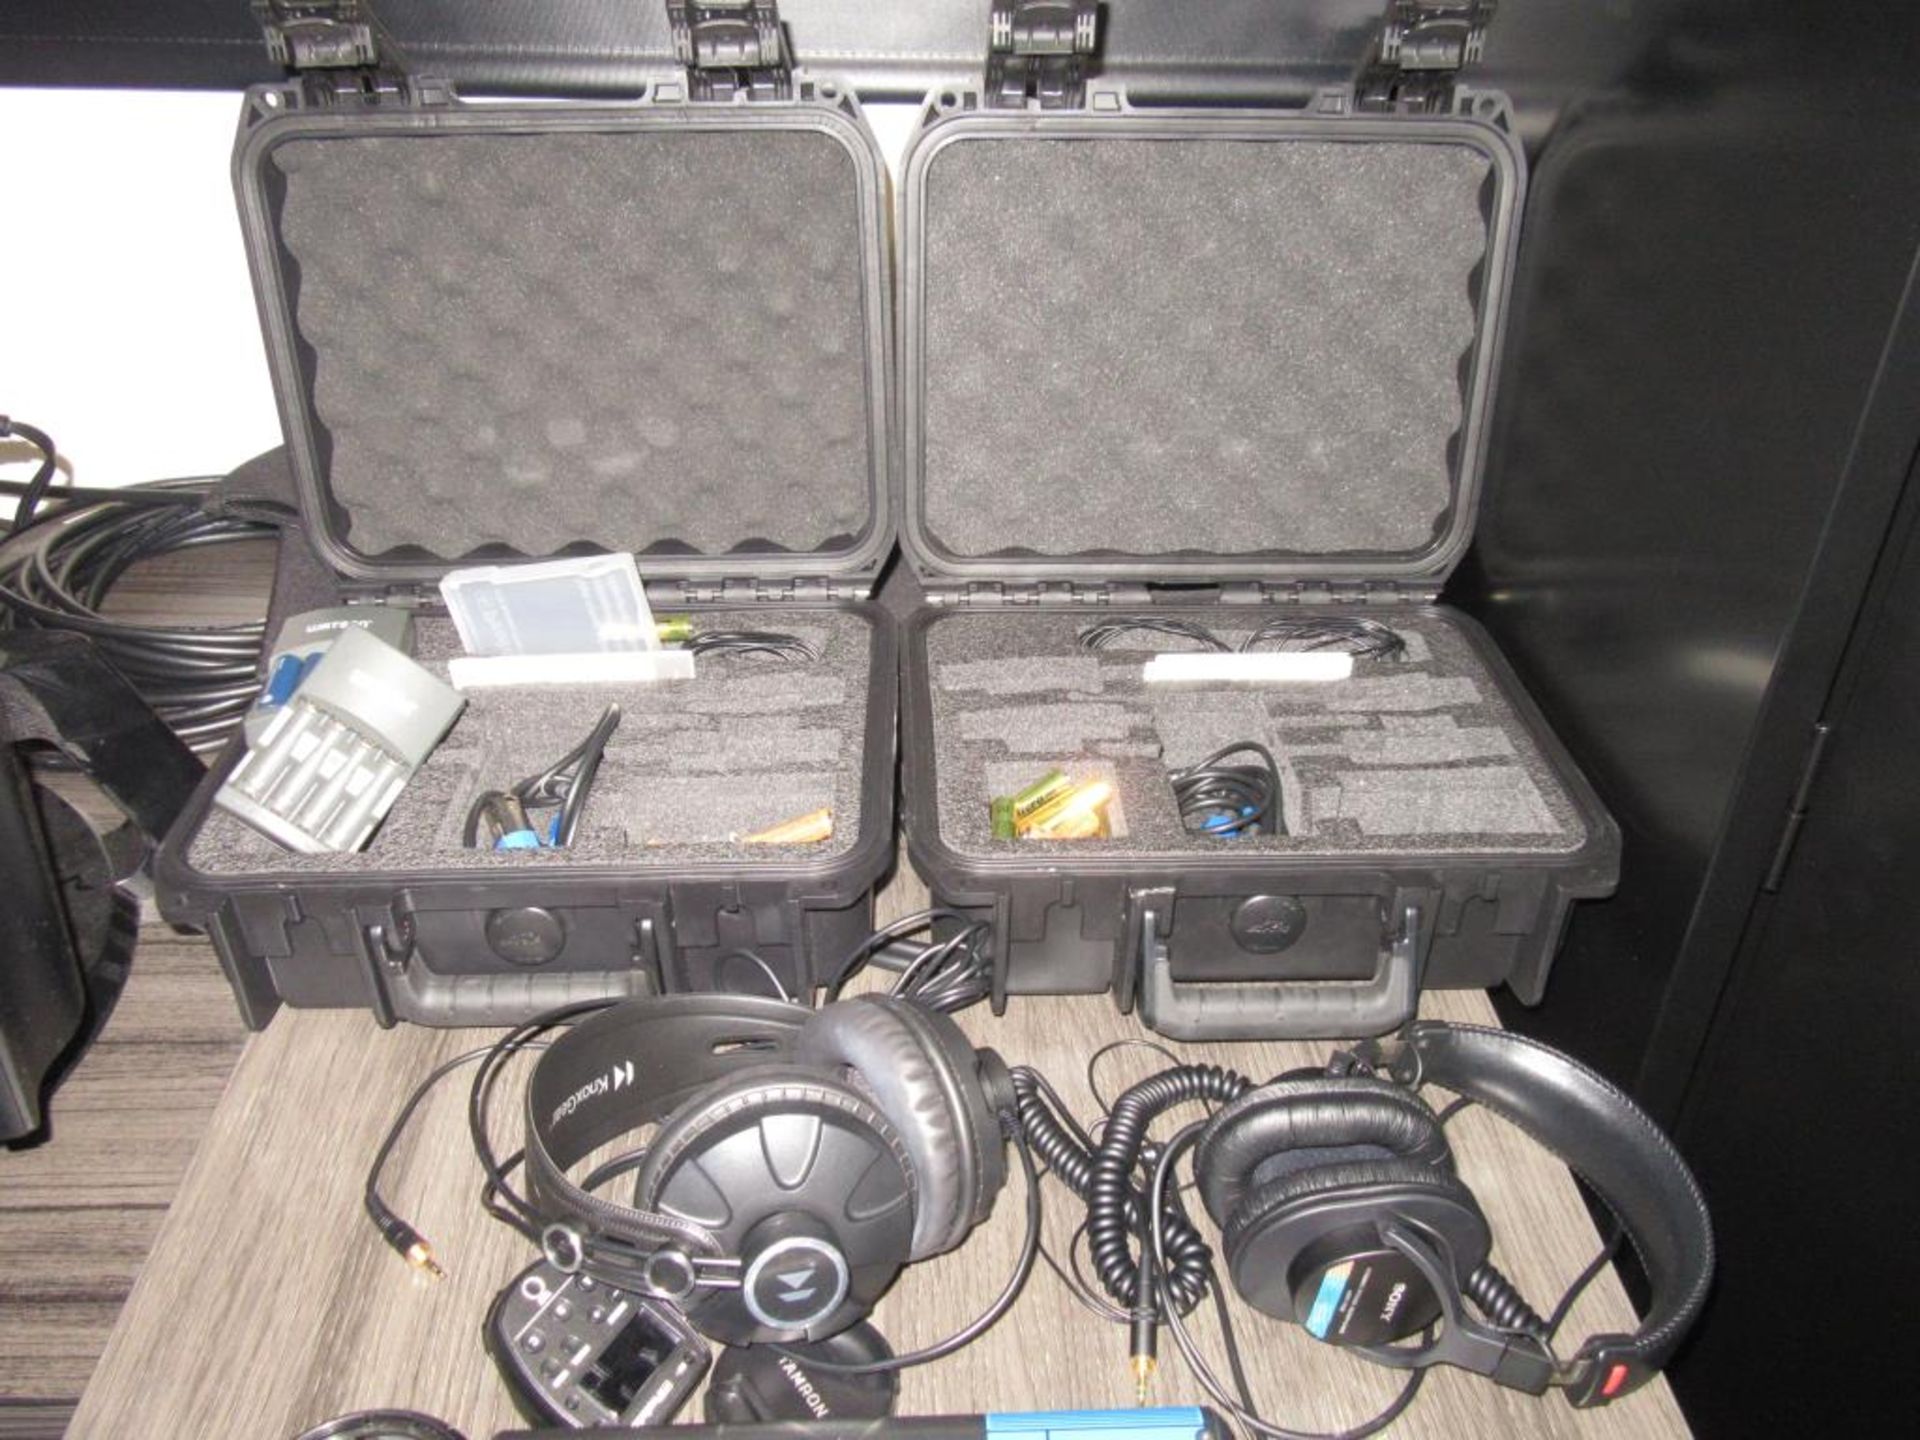 Photography & Sound Equipment - Image 12 of 28